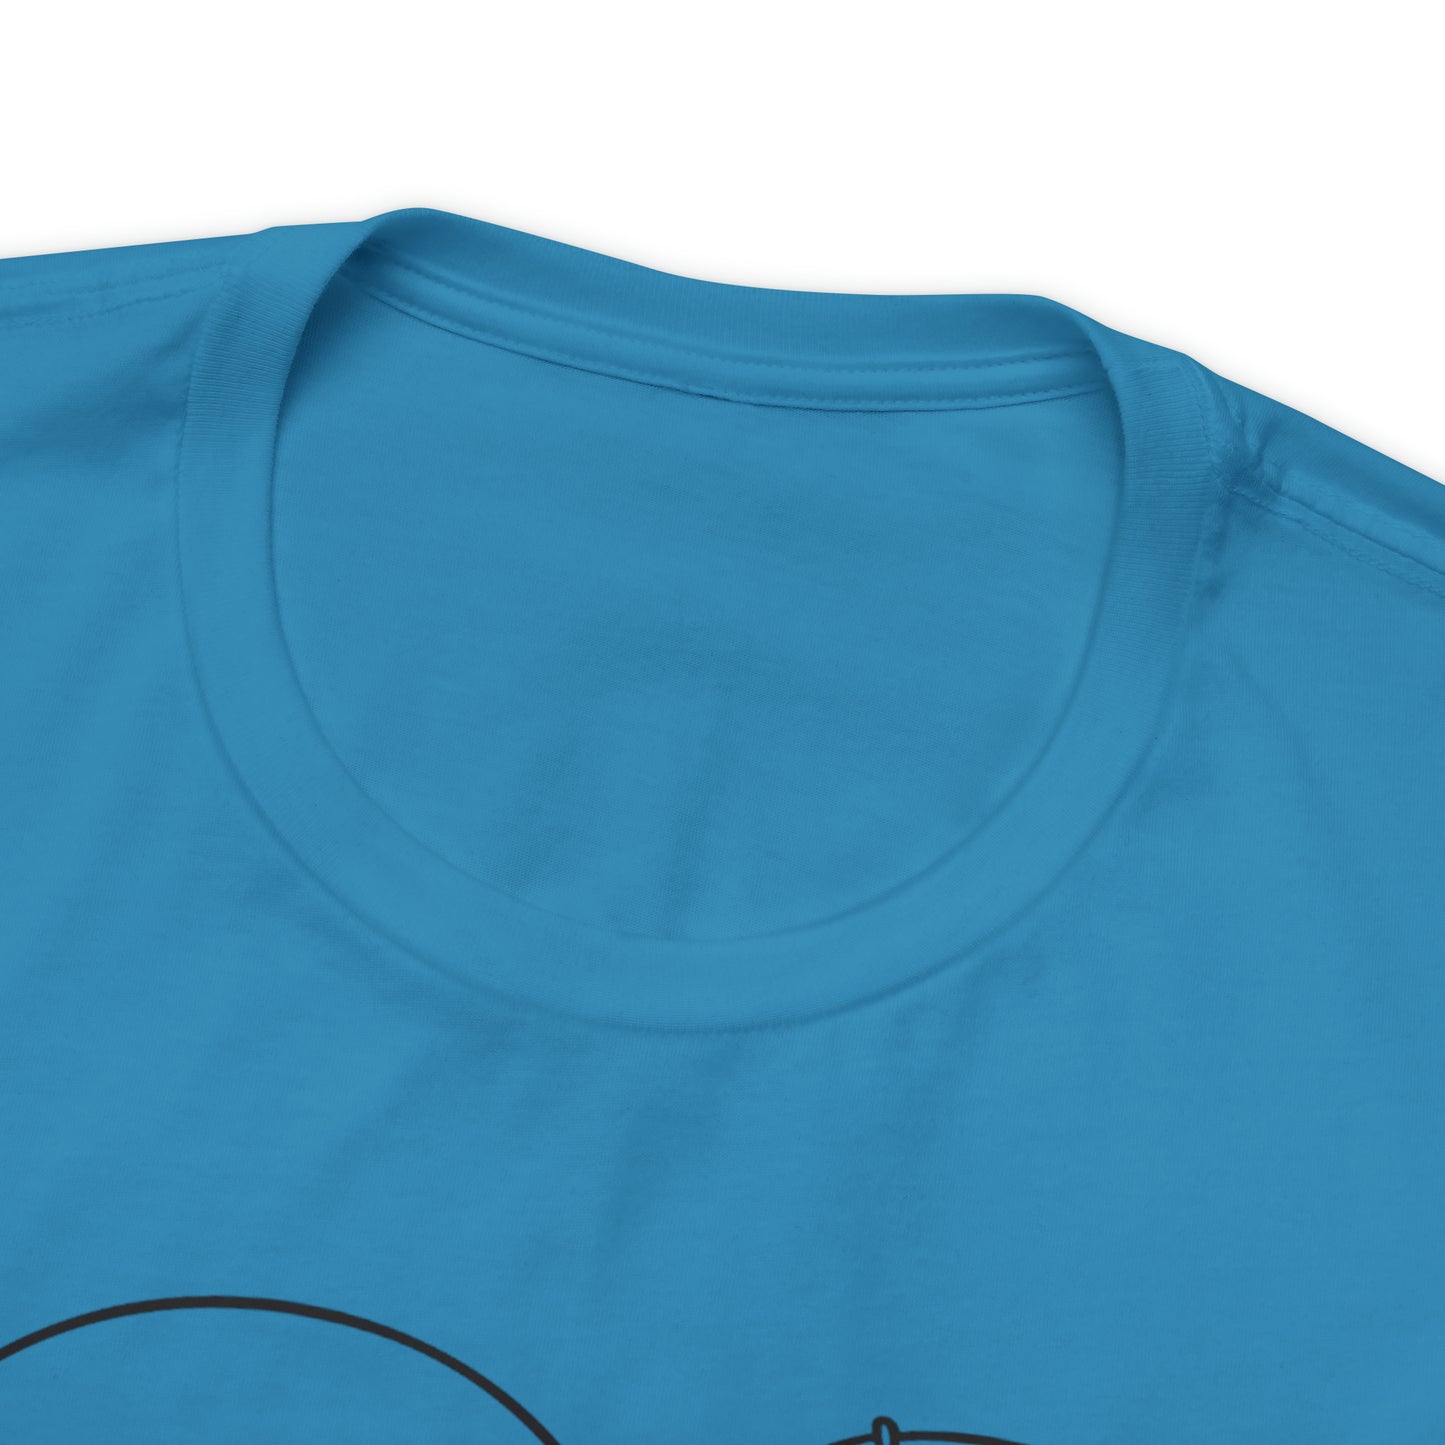 Unisex Jersey Short Sleeve Tee. IF SHE'S MUNCHING WITH MIGHT, I WILL FISH ALL DAY LONG.